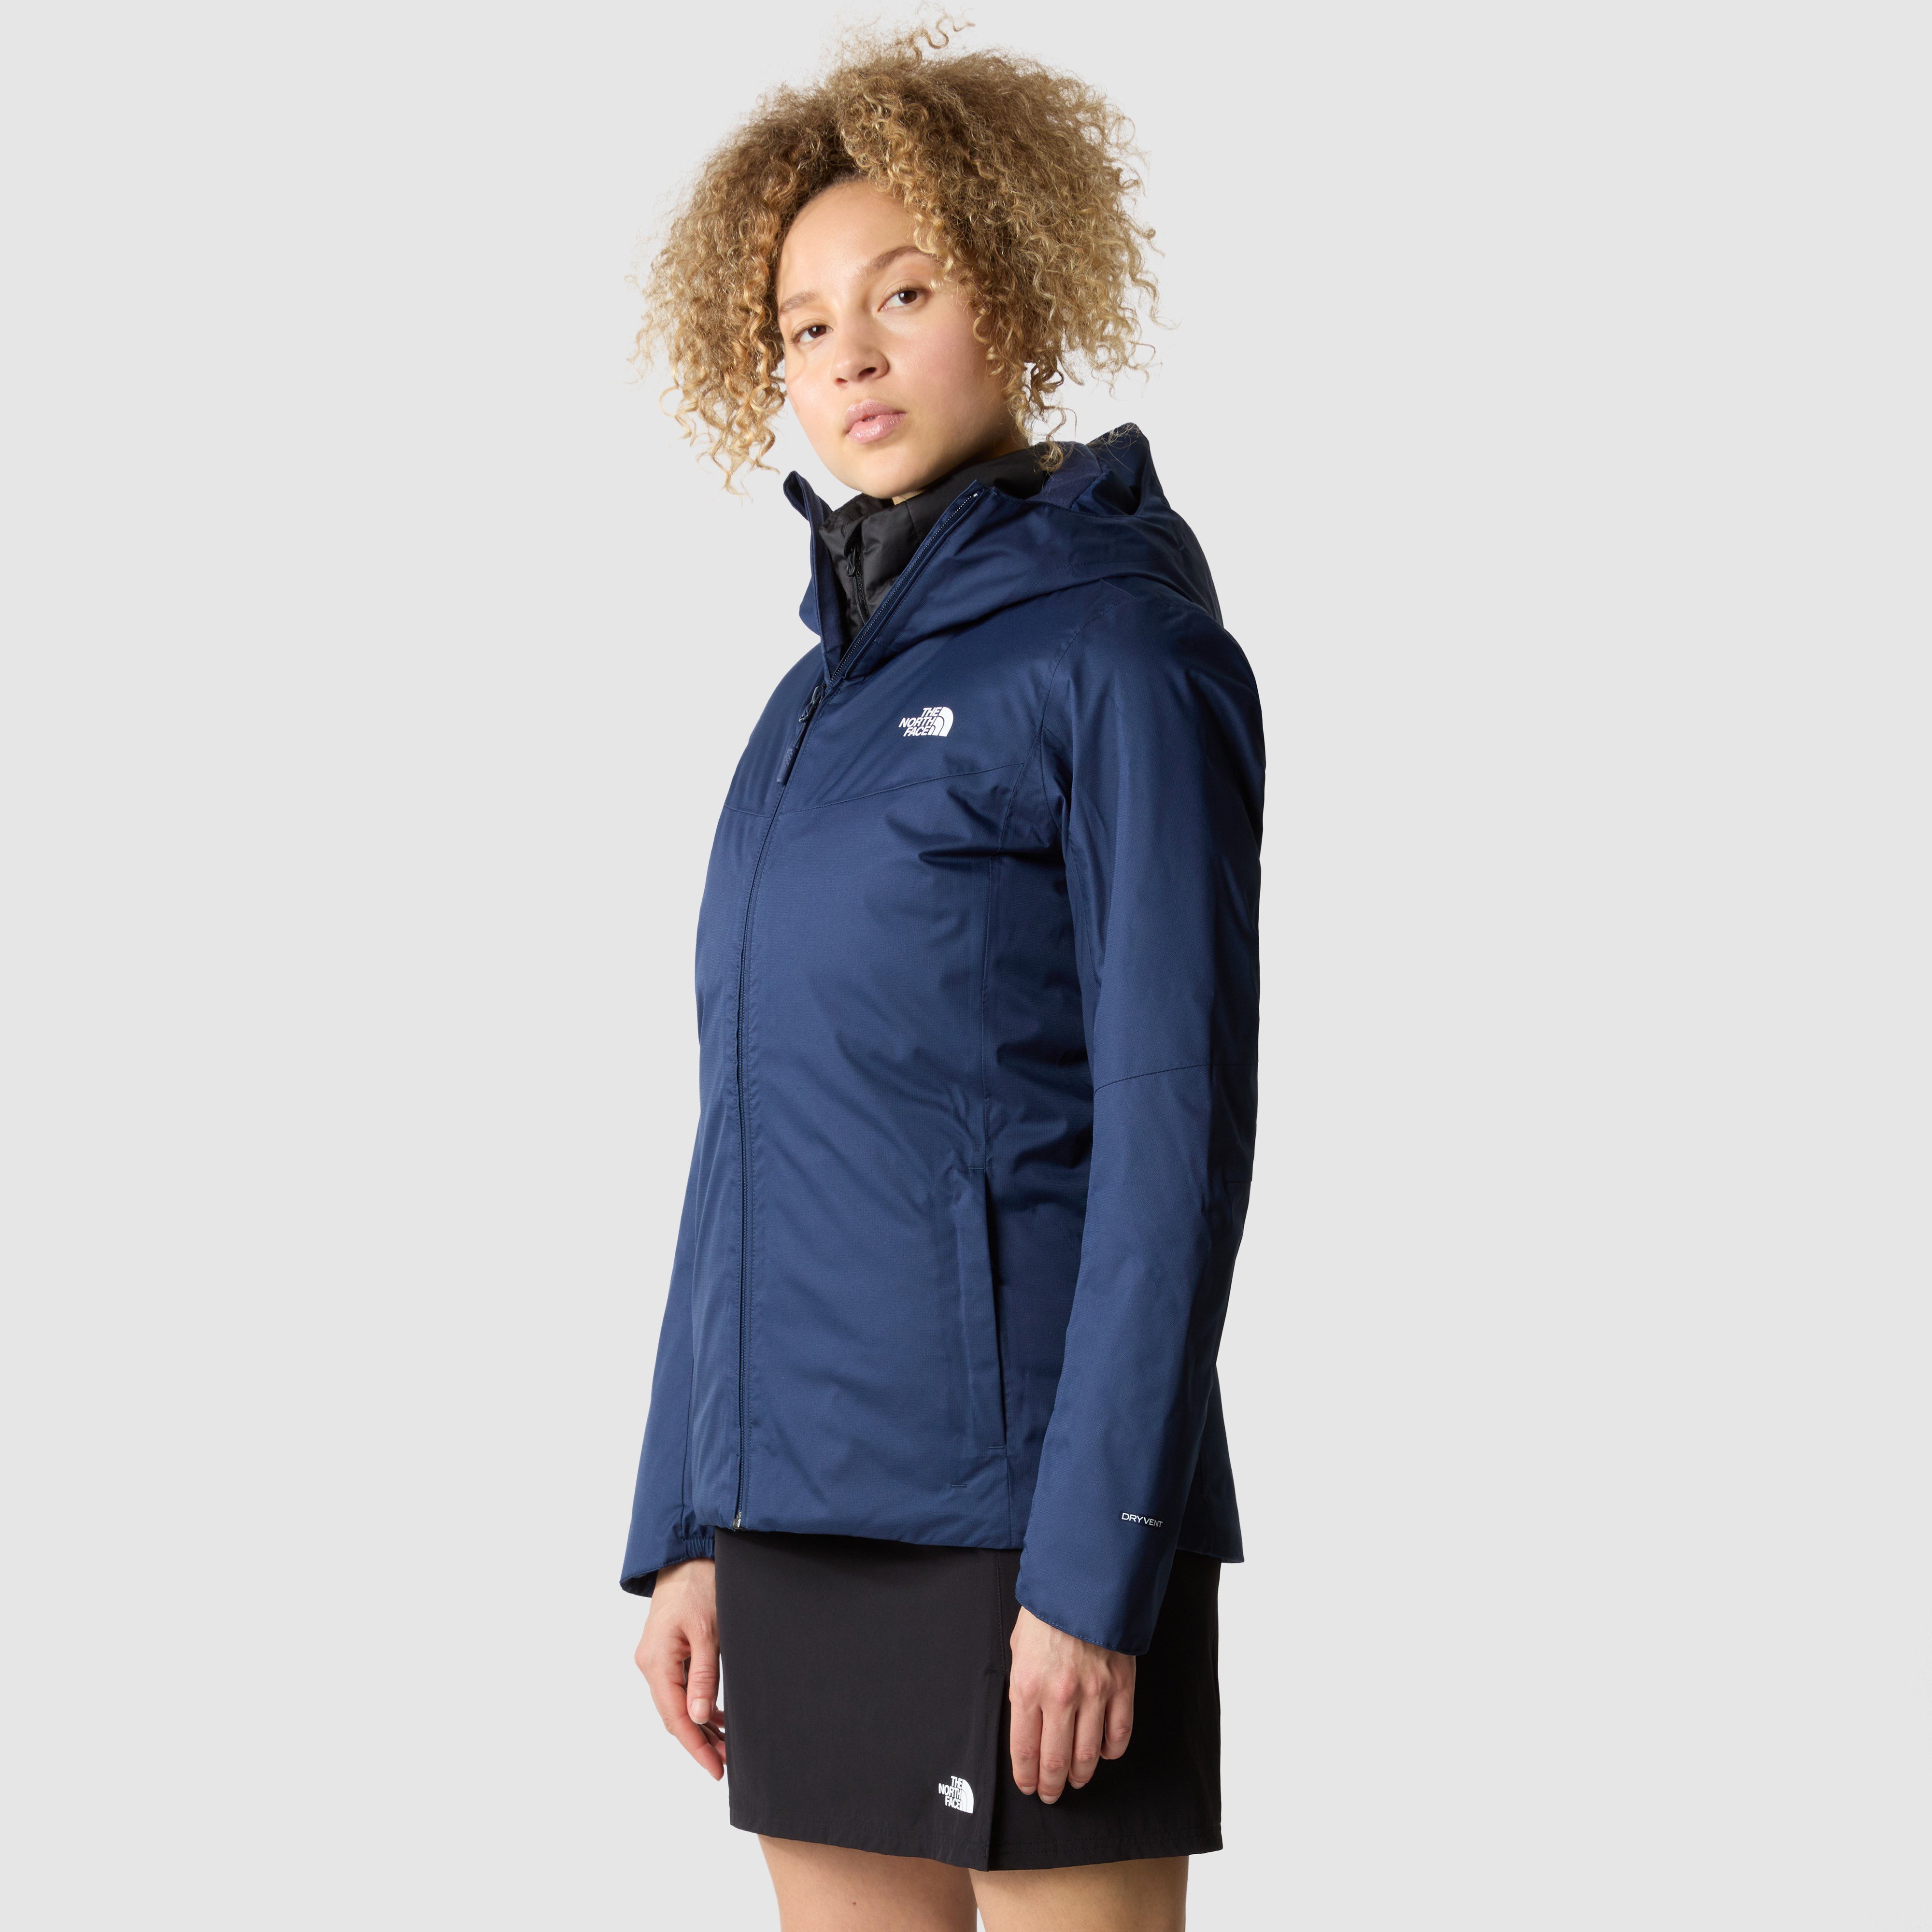 The North Logodruck W mit QUEST JACKET Funktionsjacke Face INSULATED